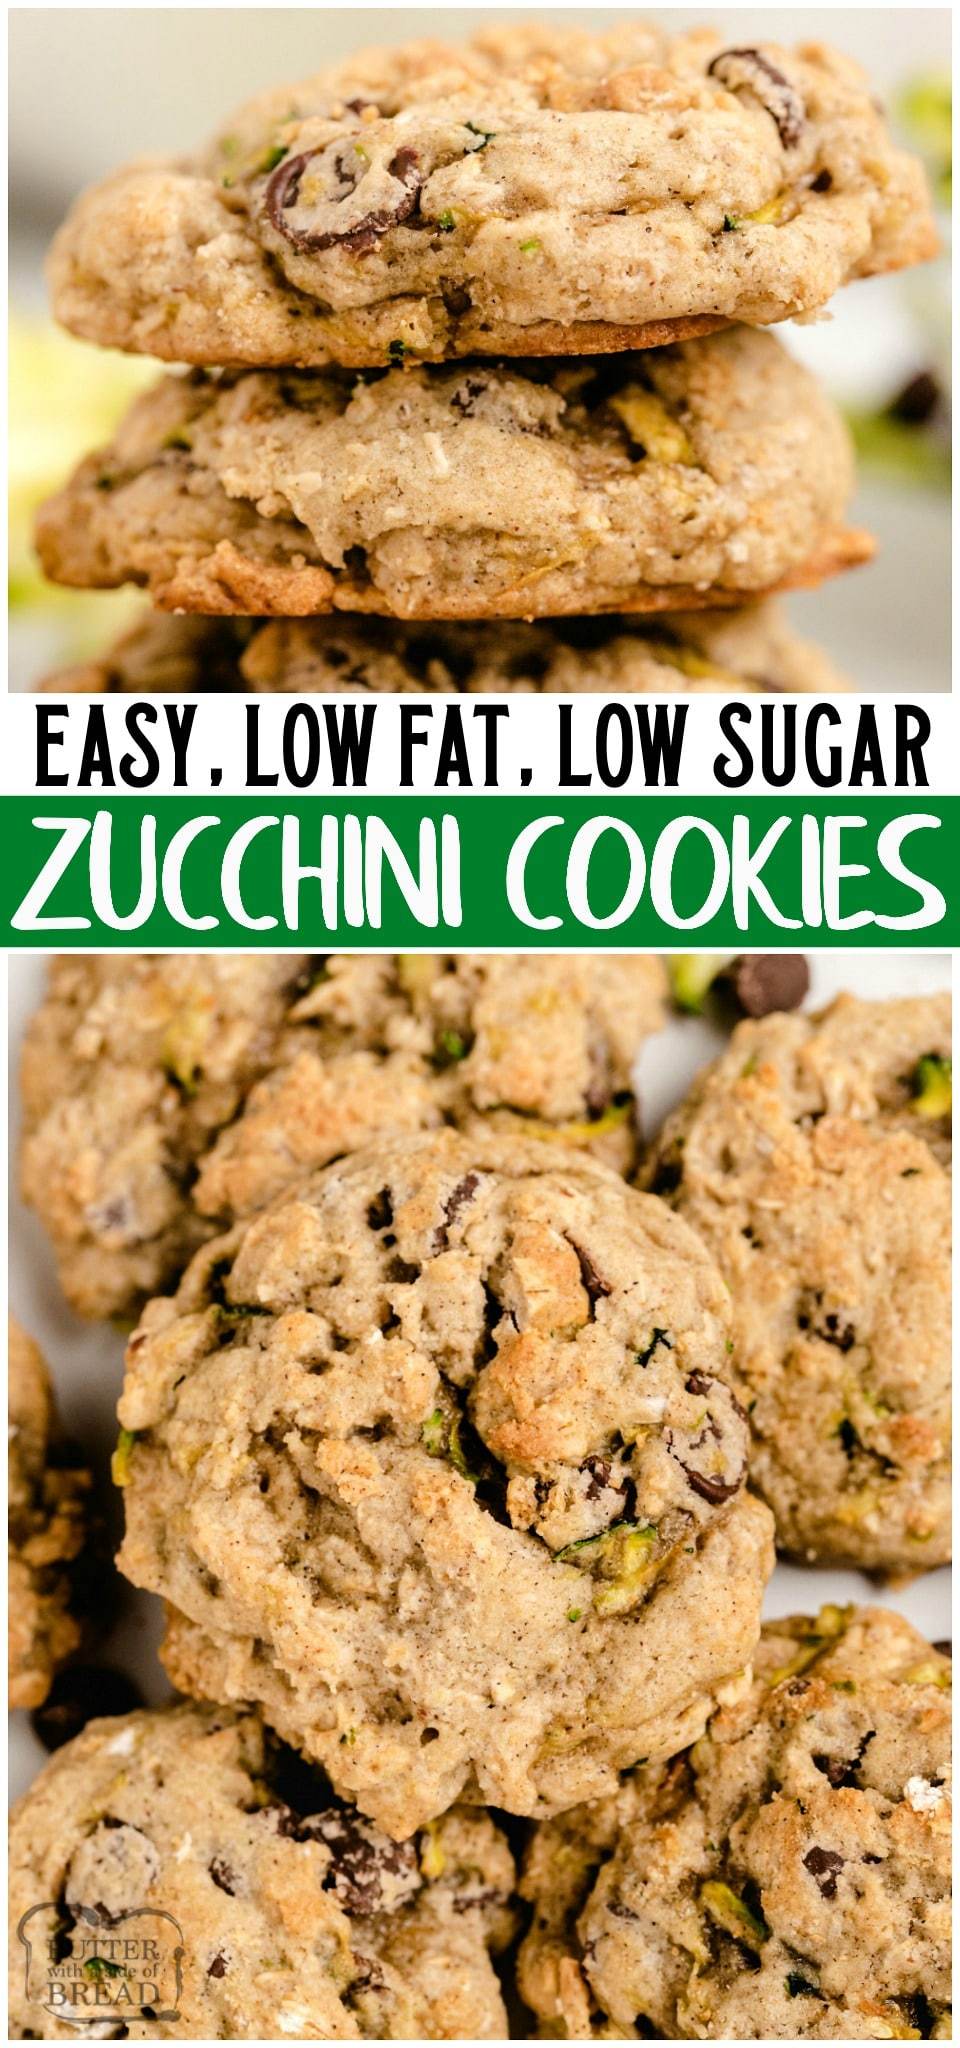 Zucchini Cookies are zucchini bread in cookie form! Soft, perfectly sweet and lower in fat & sugar, these easy-to-make zucchini cookies taste incredible! #zucchini #cookies #baking #dessert #lowfat #recipe from BUTTER WITH A SIDE OF BREAD